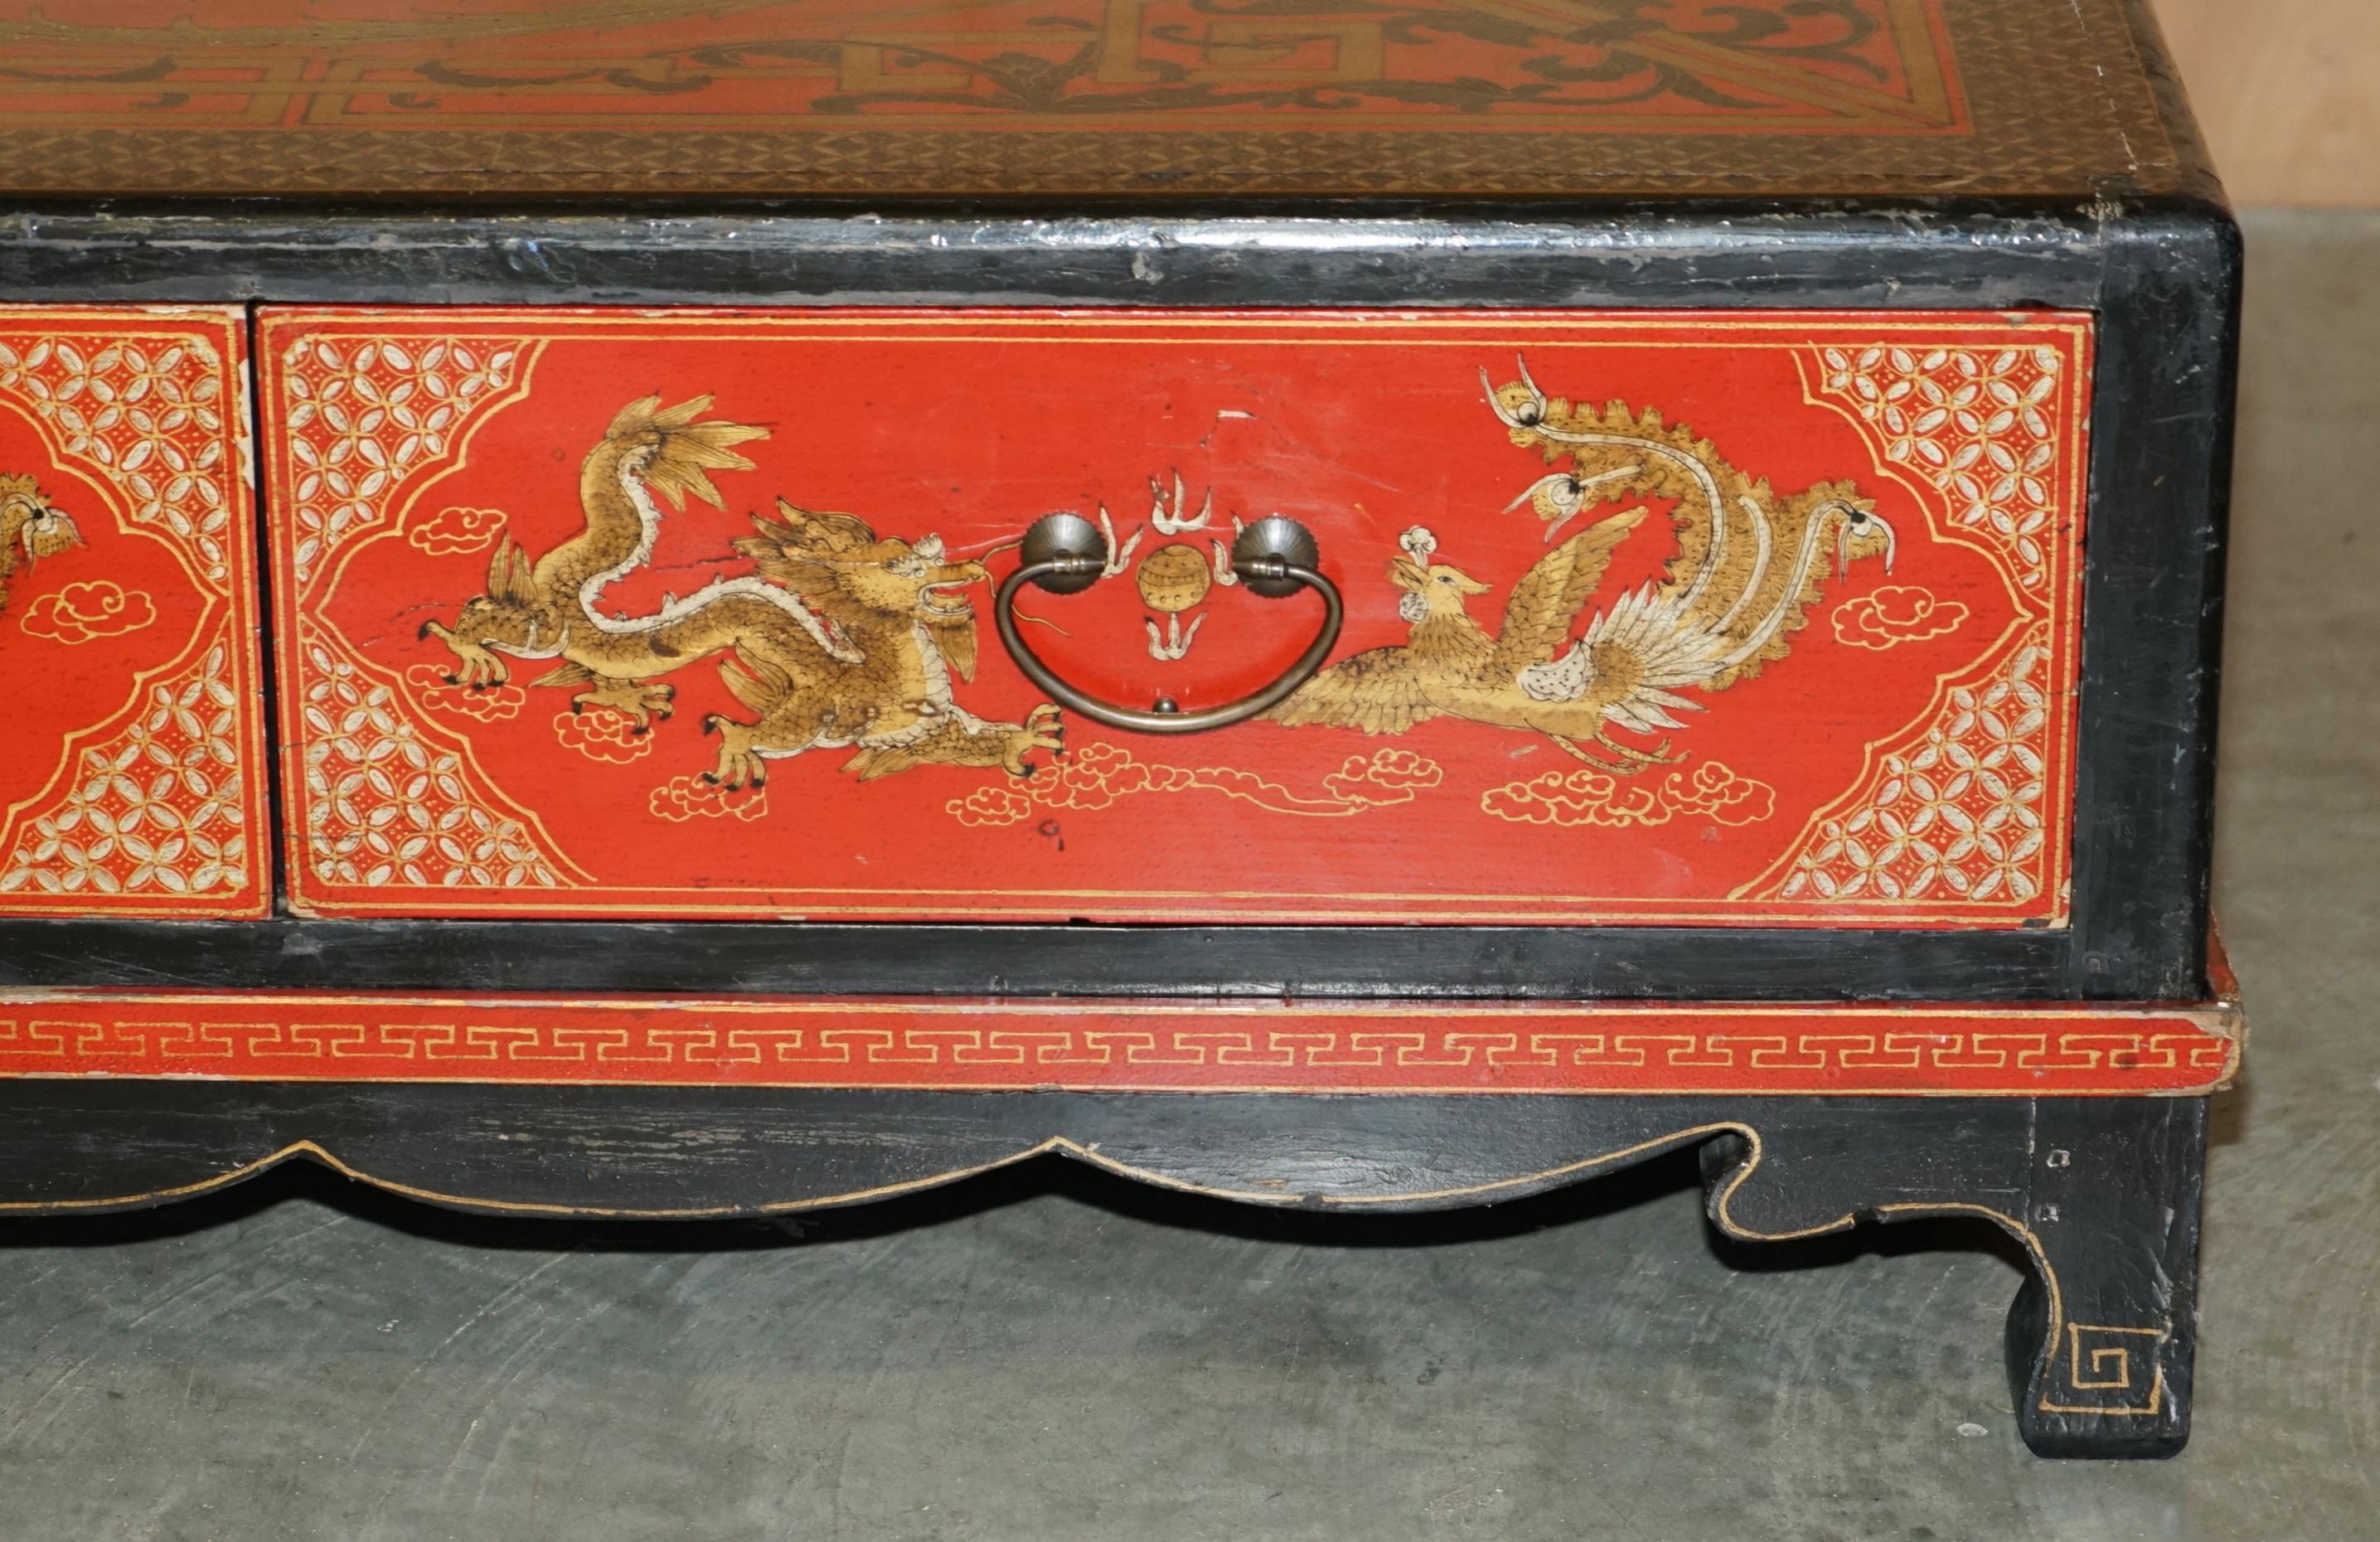 GROSSE ANTIQUE CIRCA 1920 CHINESISCHE DRACHE CHINOISERIE EXPORT COFFEE TABLE DRAWERS im Angebot 8